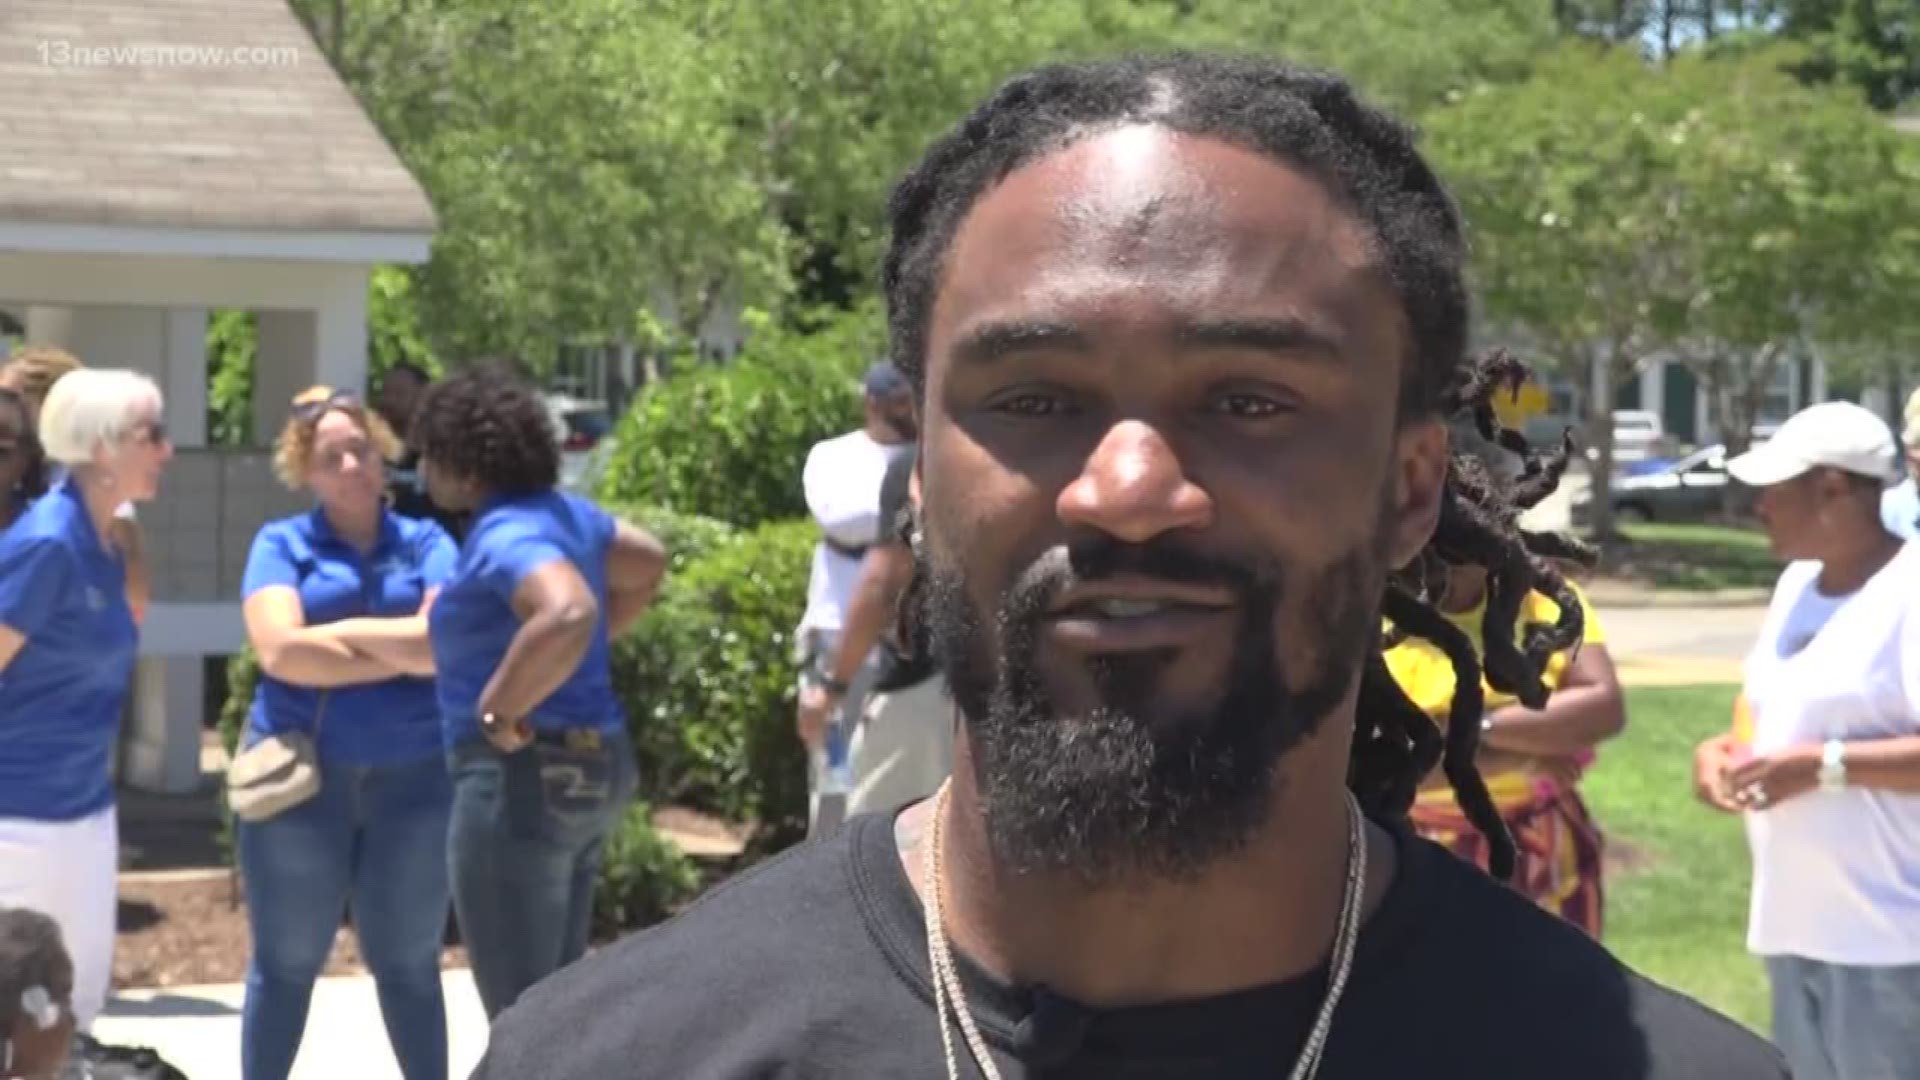 B.W. Webb is a cornerback for the Cincinnati Bengals and a Newport News native. This summer he's helping the Virginia Peninsula Foodbank kickoff its Summer Food Service Program, which provides meals for kids who normally receive free and reduced meals during the school year.